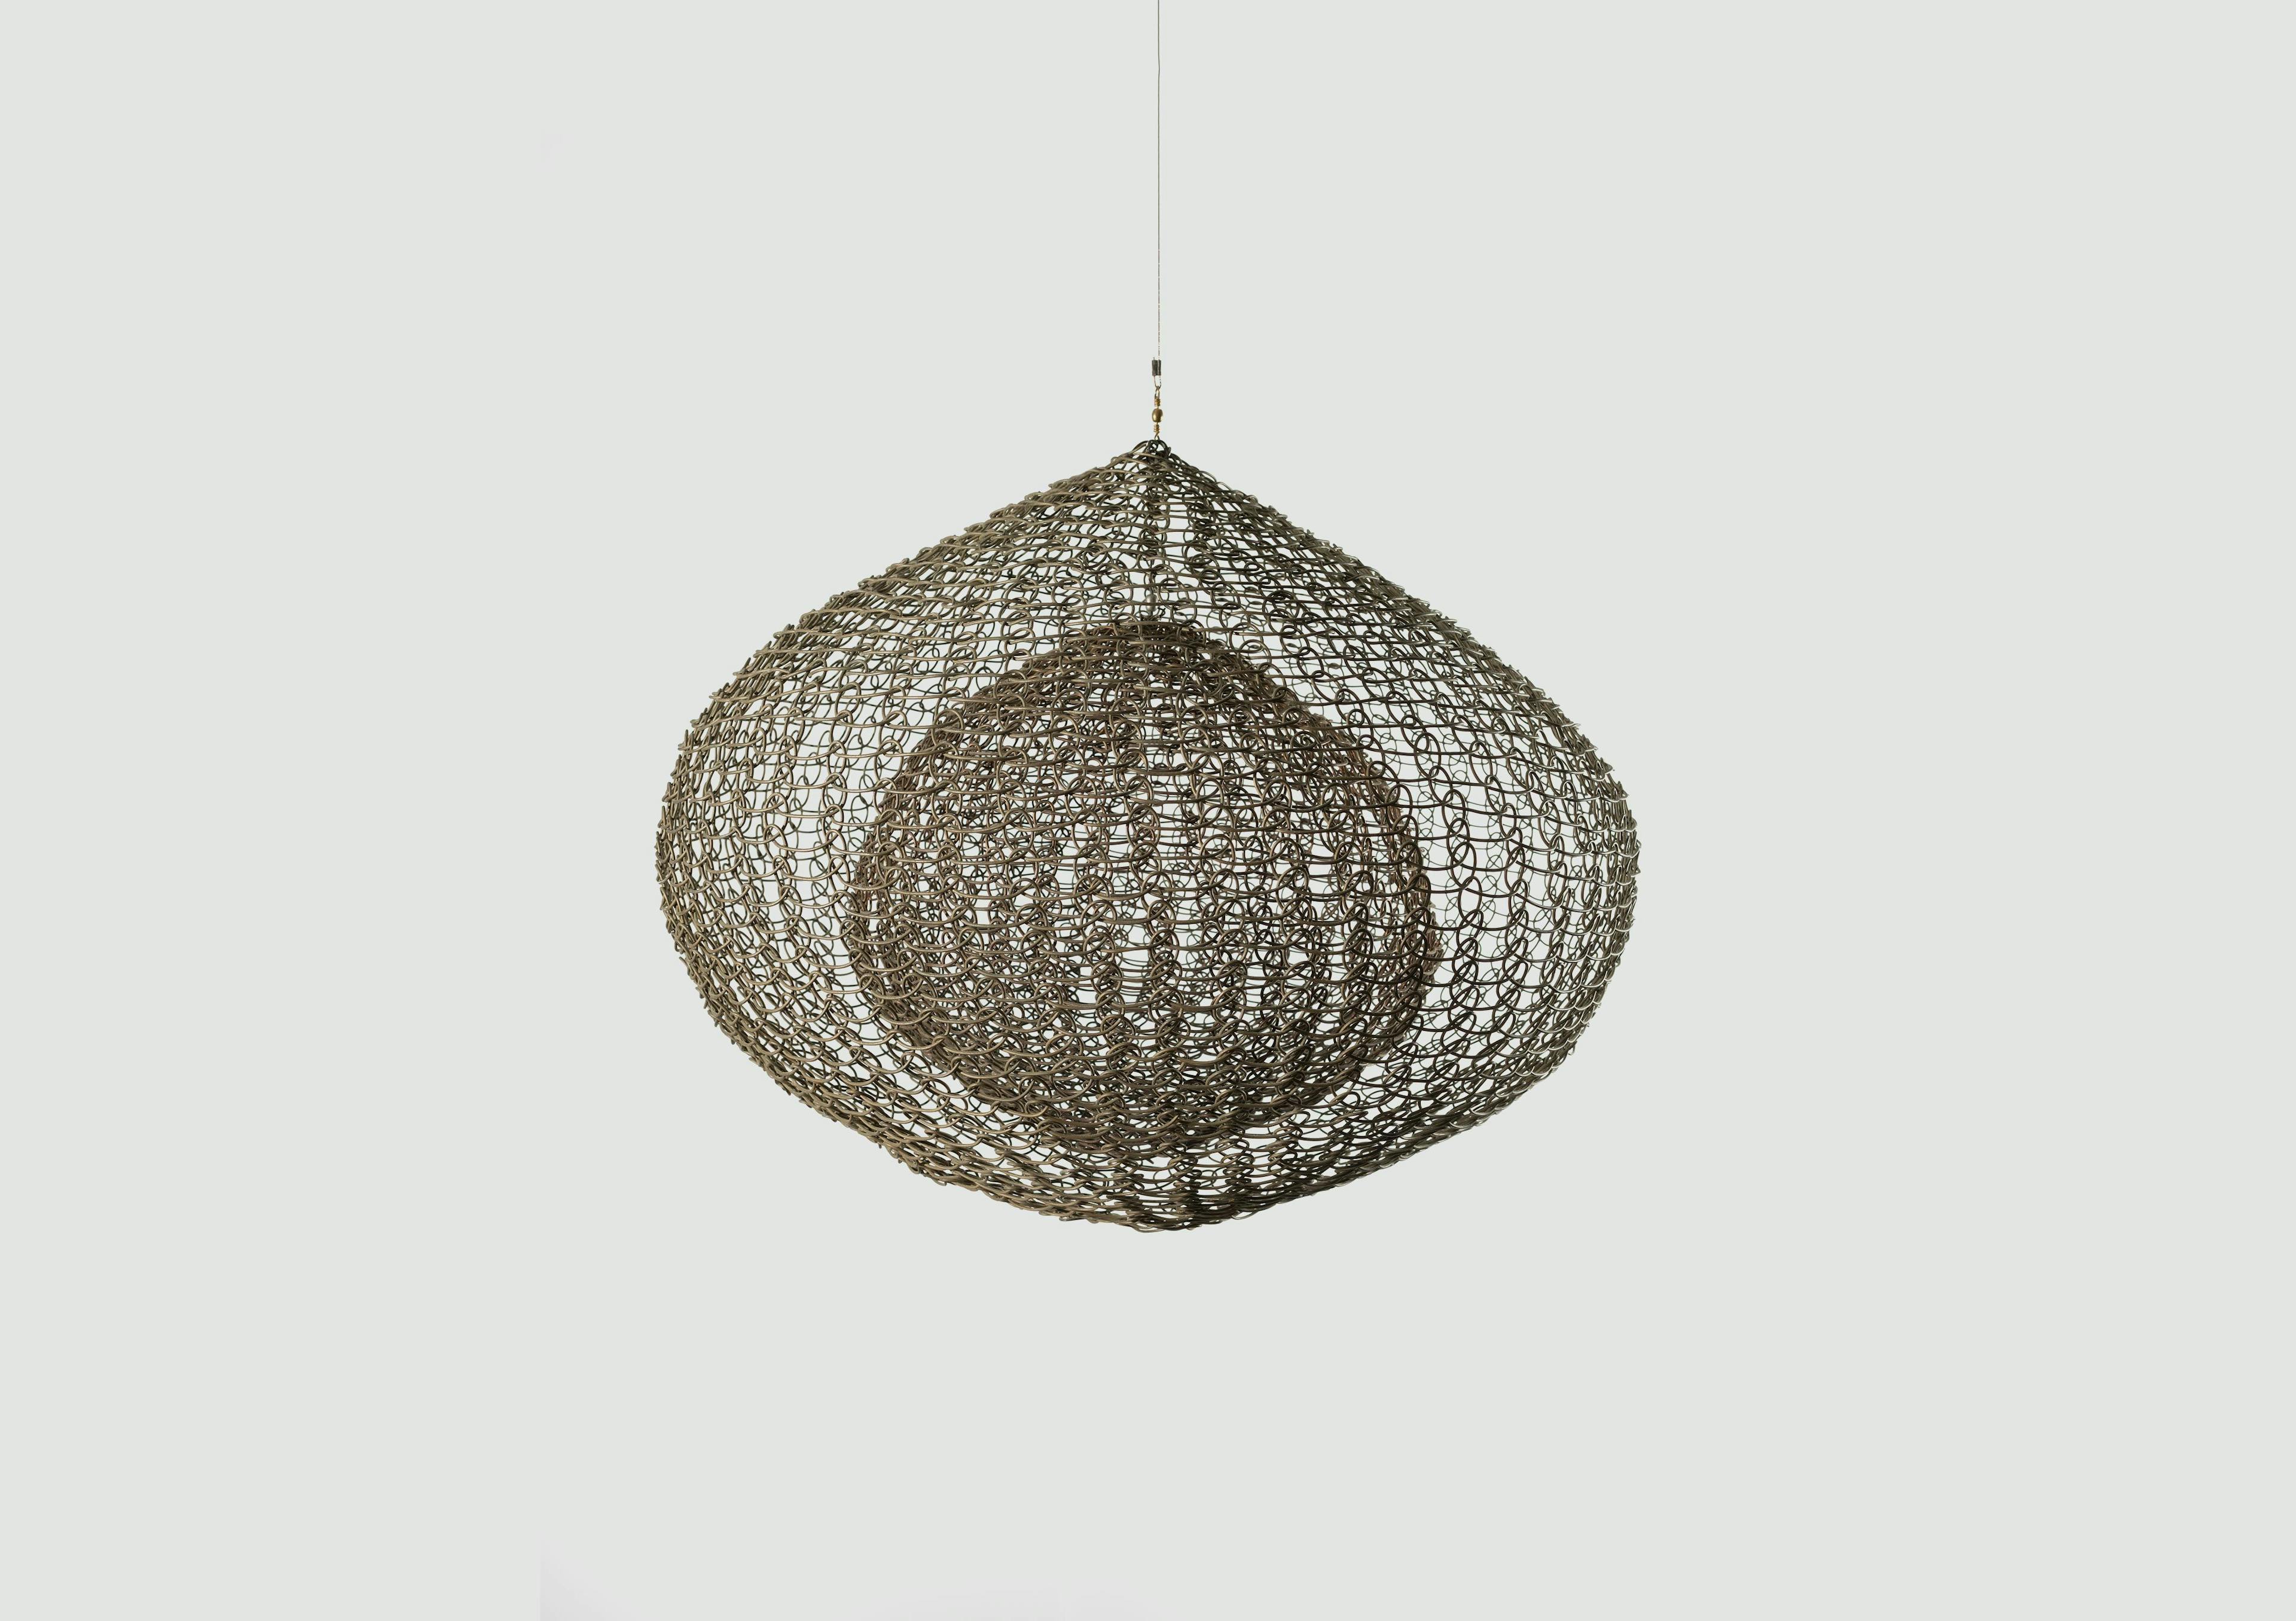 A mixed media artwork by Ruth Asawa, titled Untitled (S.068, Hanging, Single Lobe, with a Suspended Interior Sphere), circa 1952.